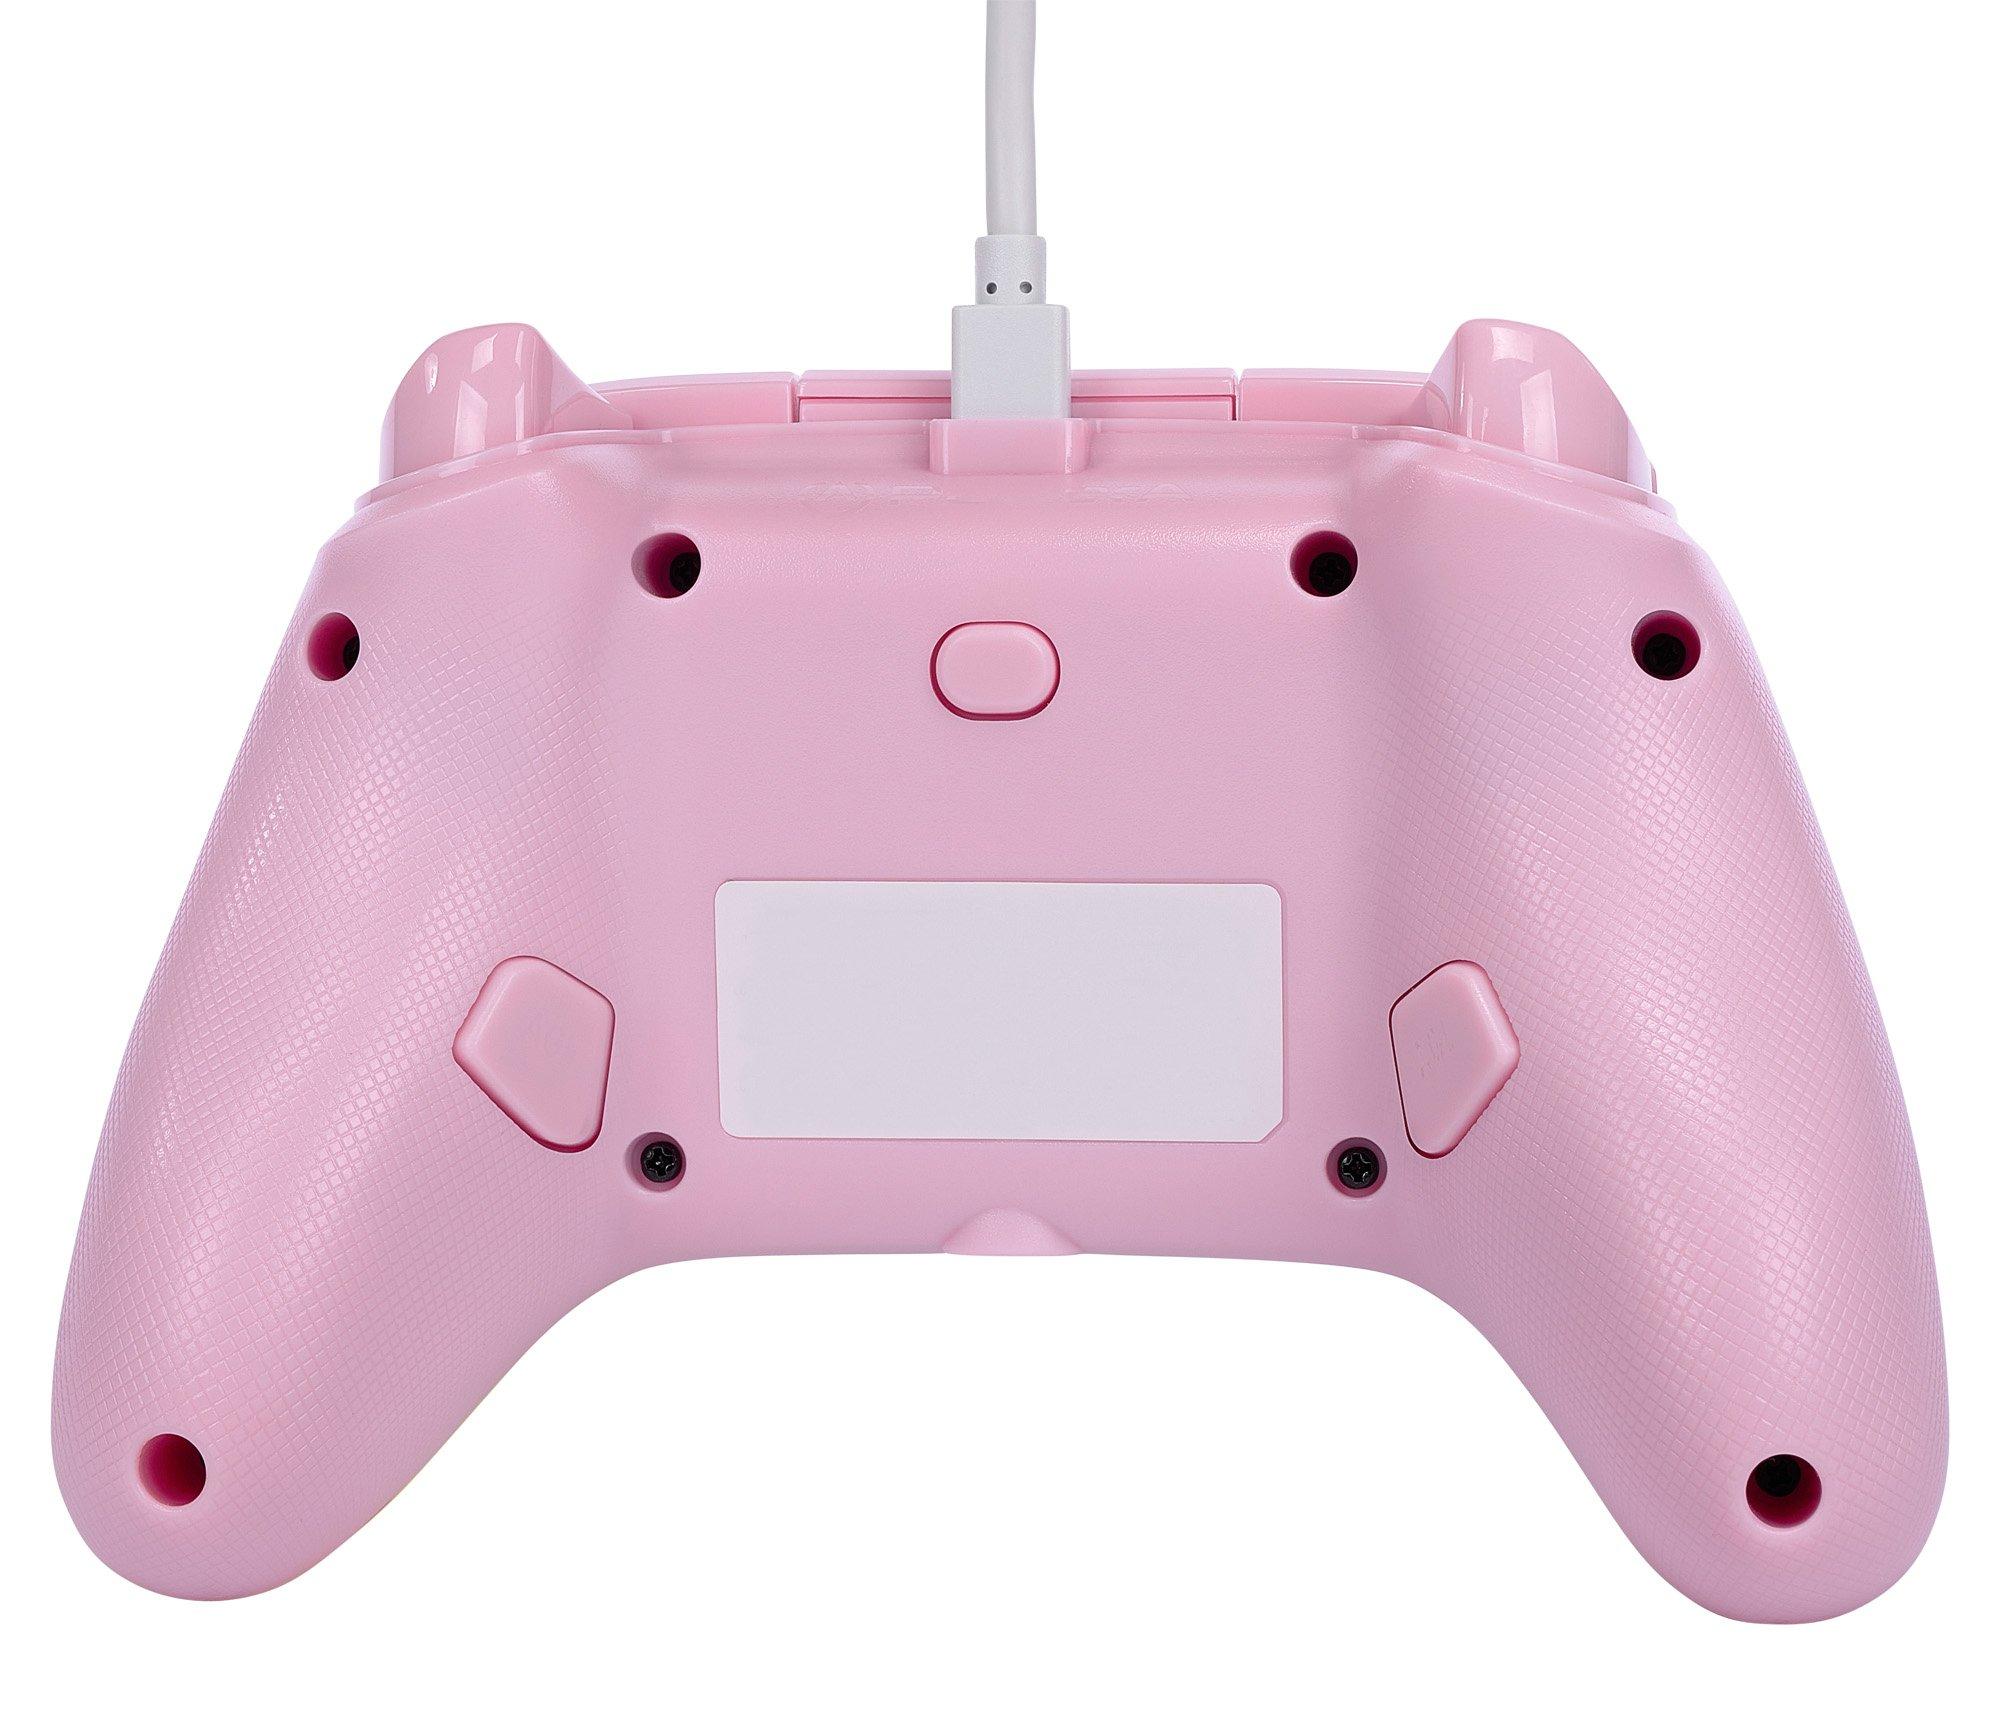 Powera Enhanced Wired Controller for Xbox Series X|S (Pink lemonade)